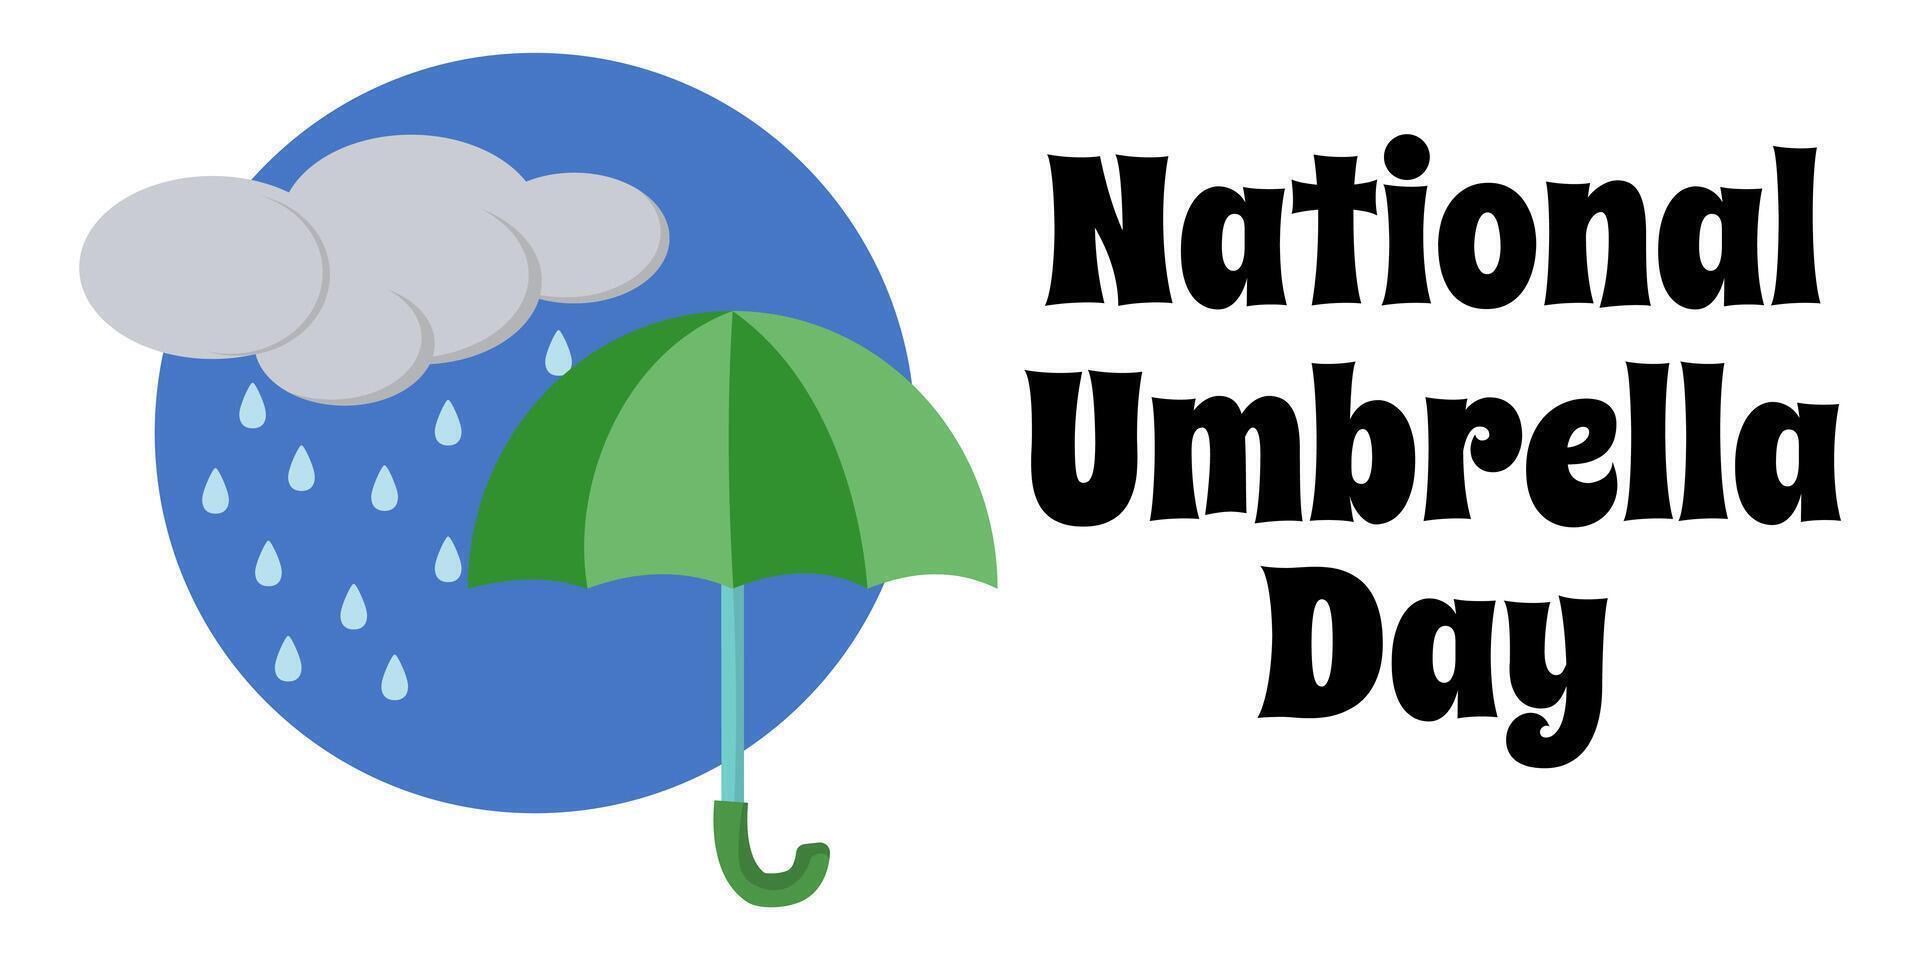 National Umbrella Day, simple horizontal holiday poster or banner design vector